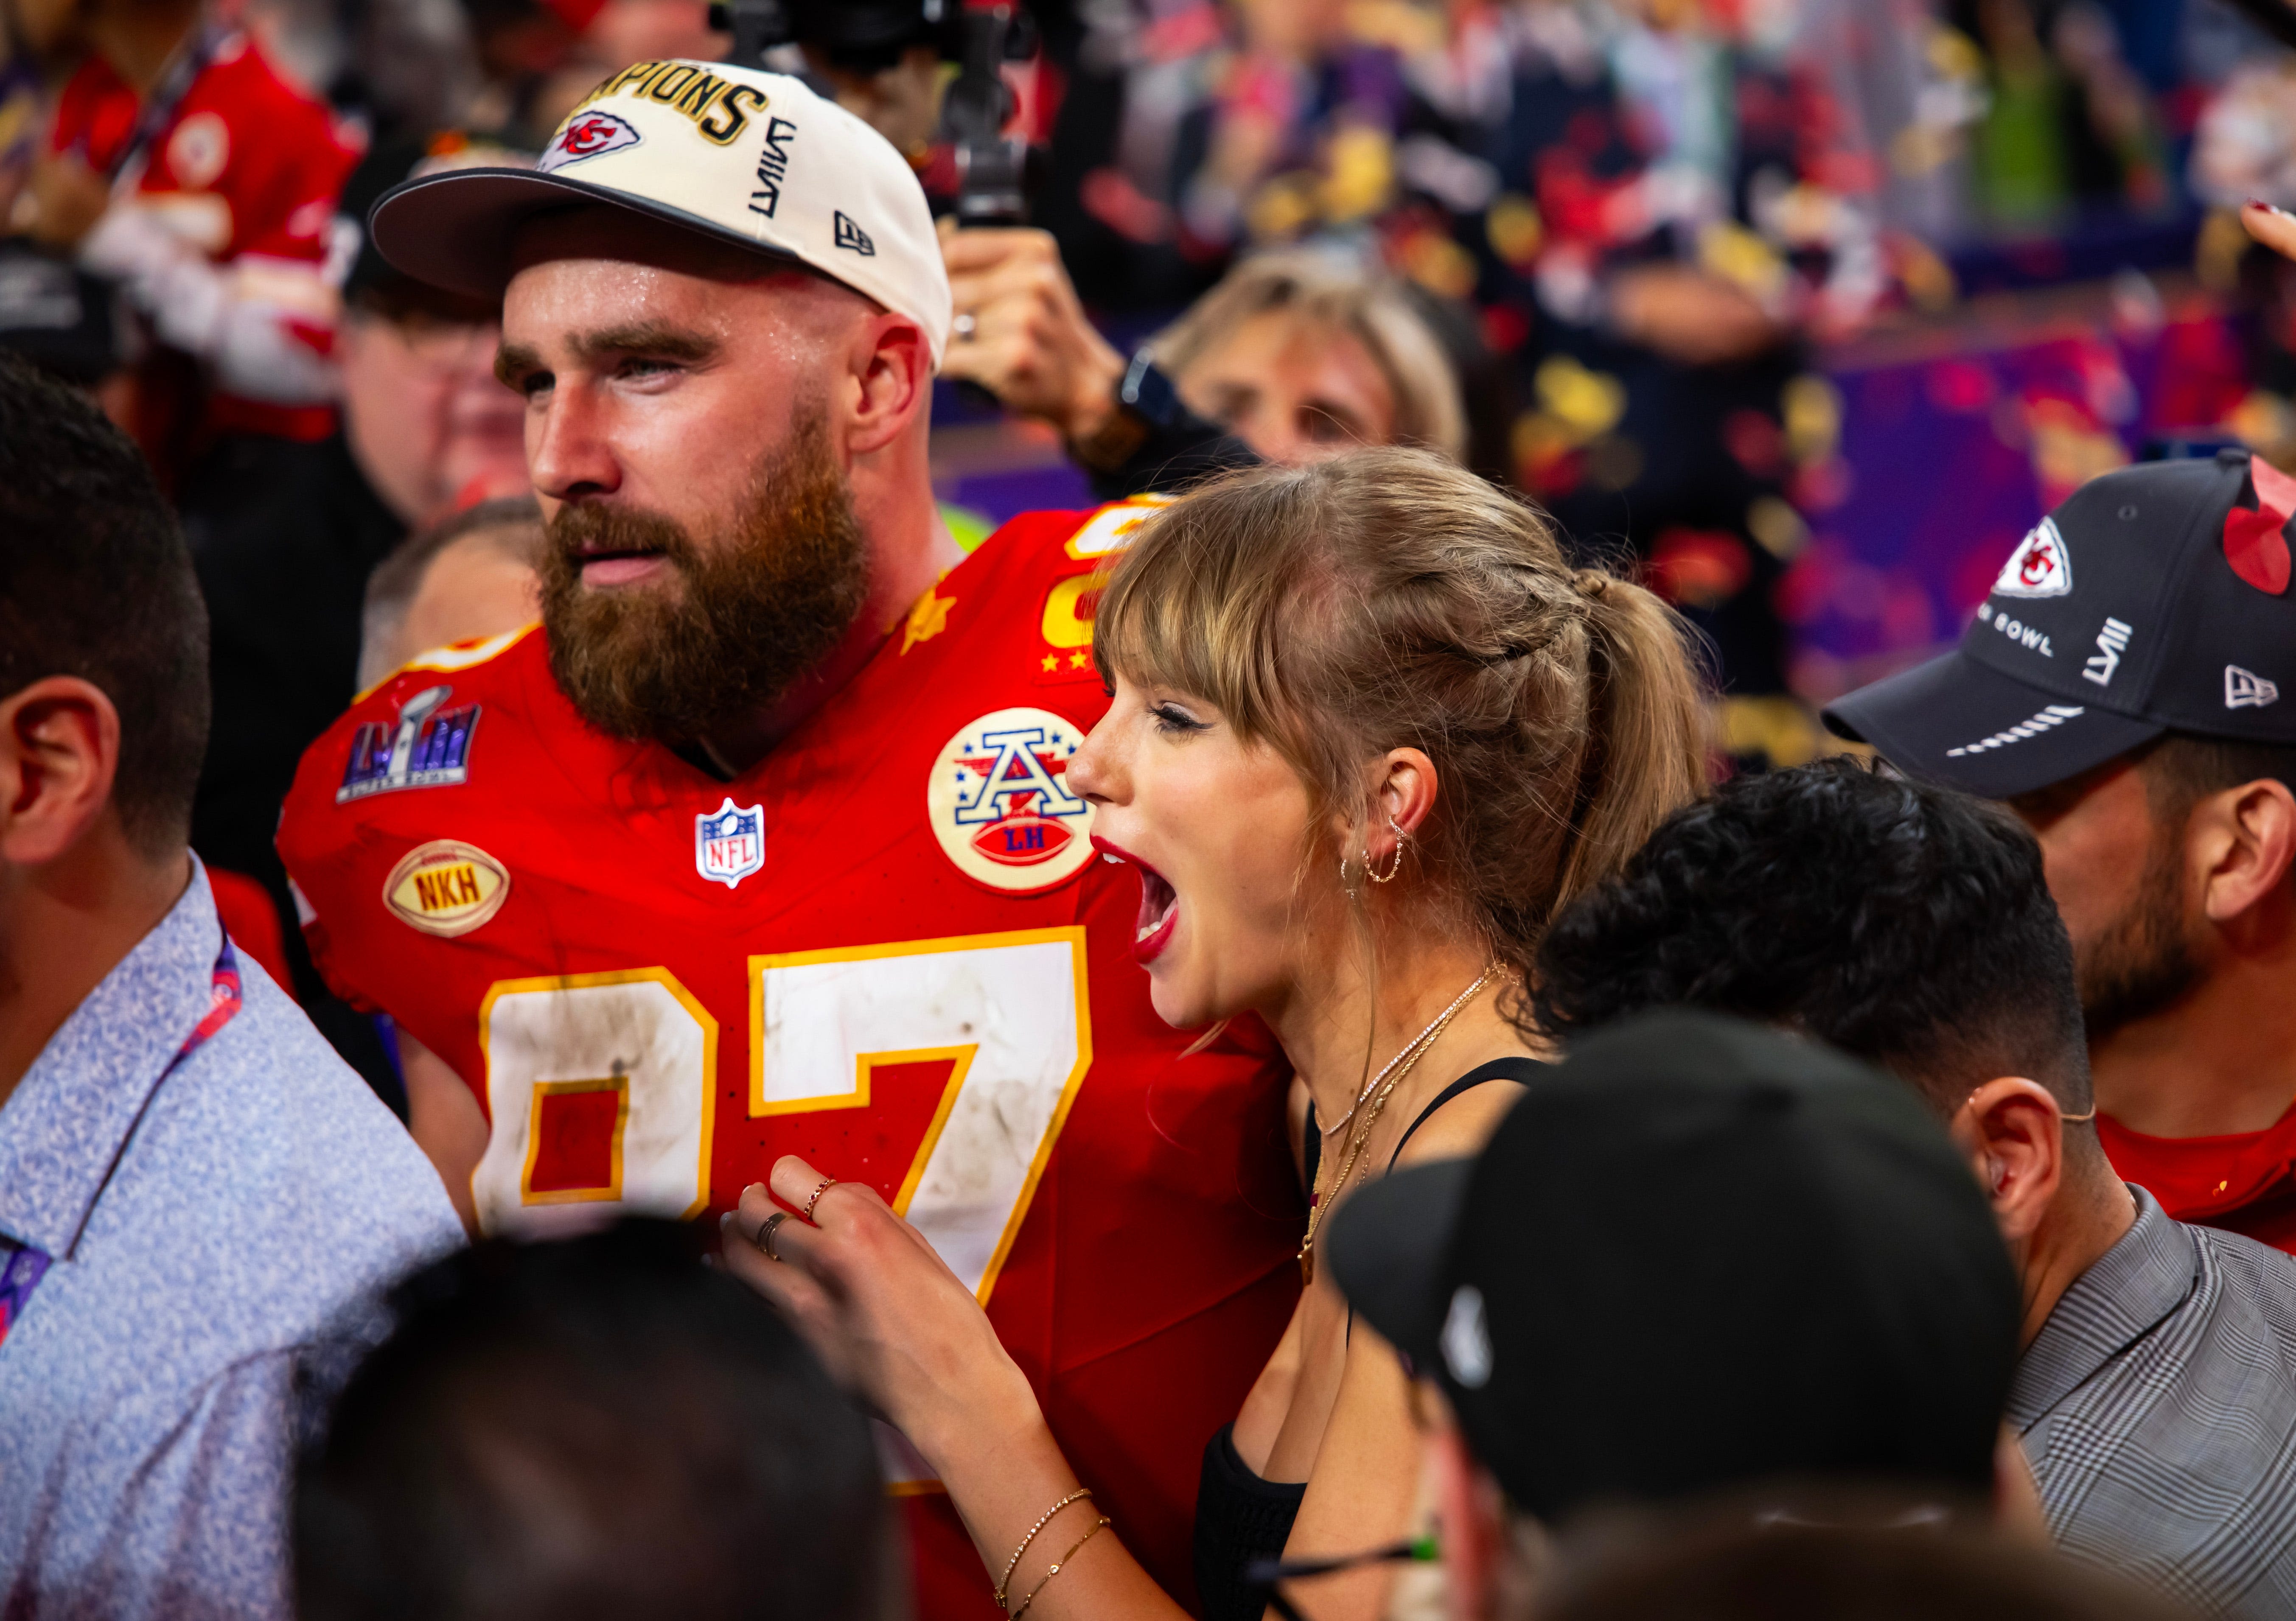 Taylor Swift could make it to quite a few Chiefs games this season. See the list